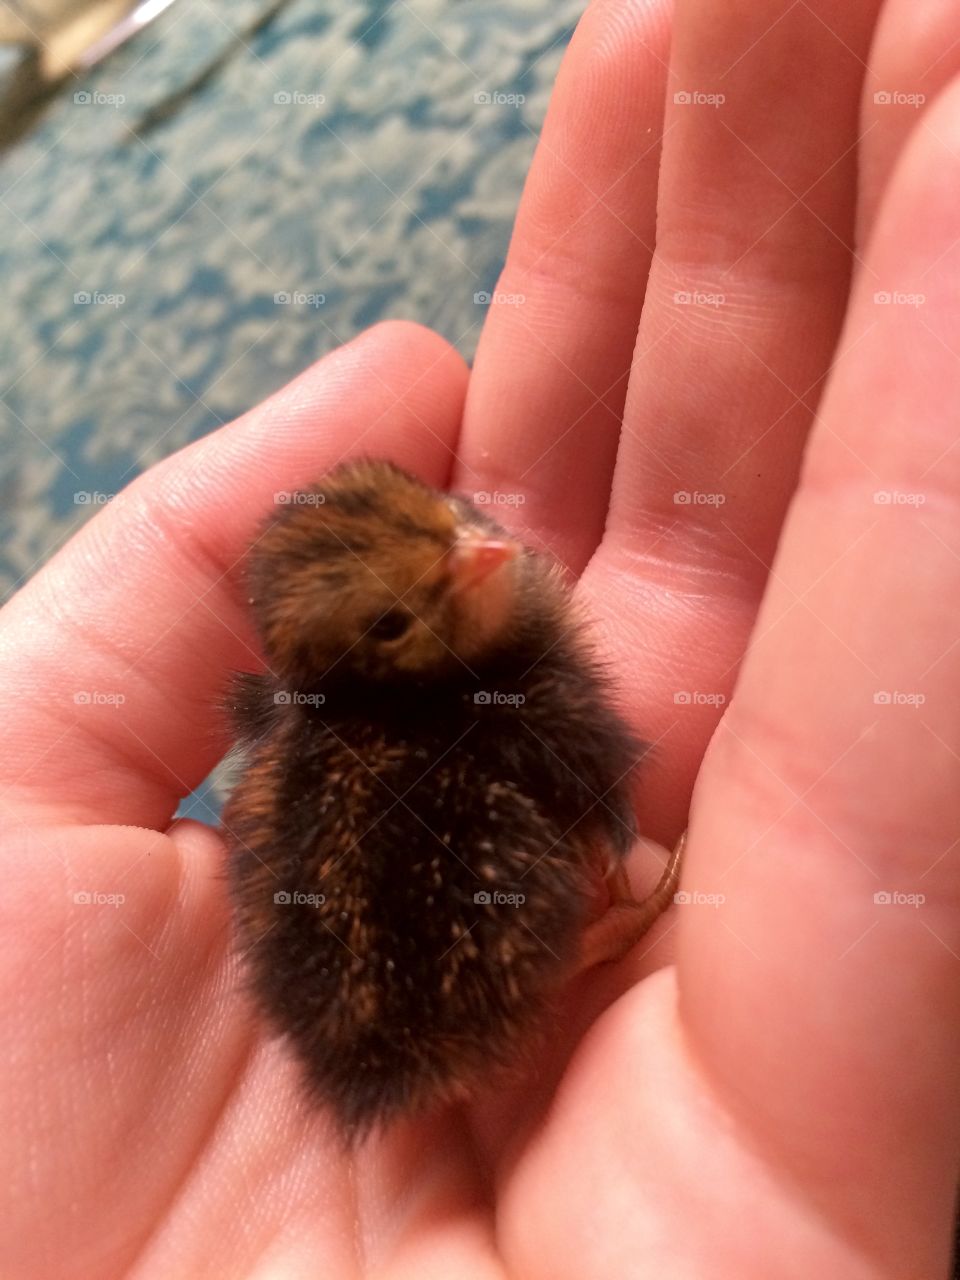 Day old king quail chick posing for the camera is so fluffy, cute and adorably tiny!